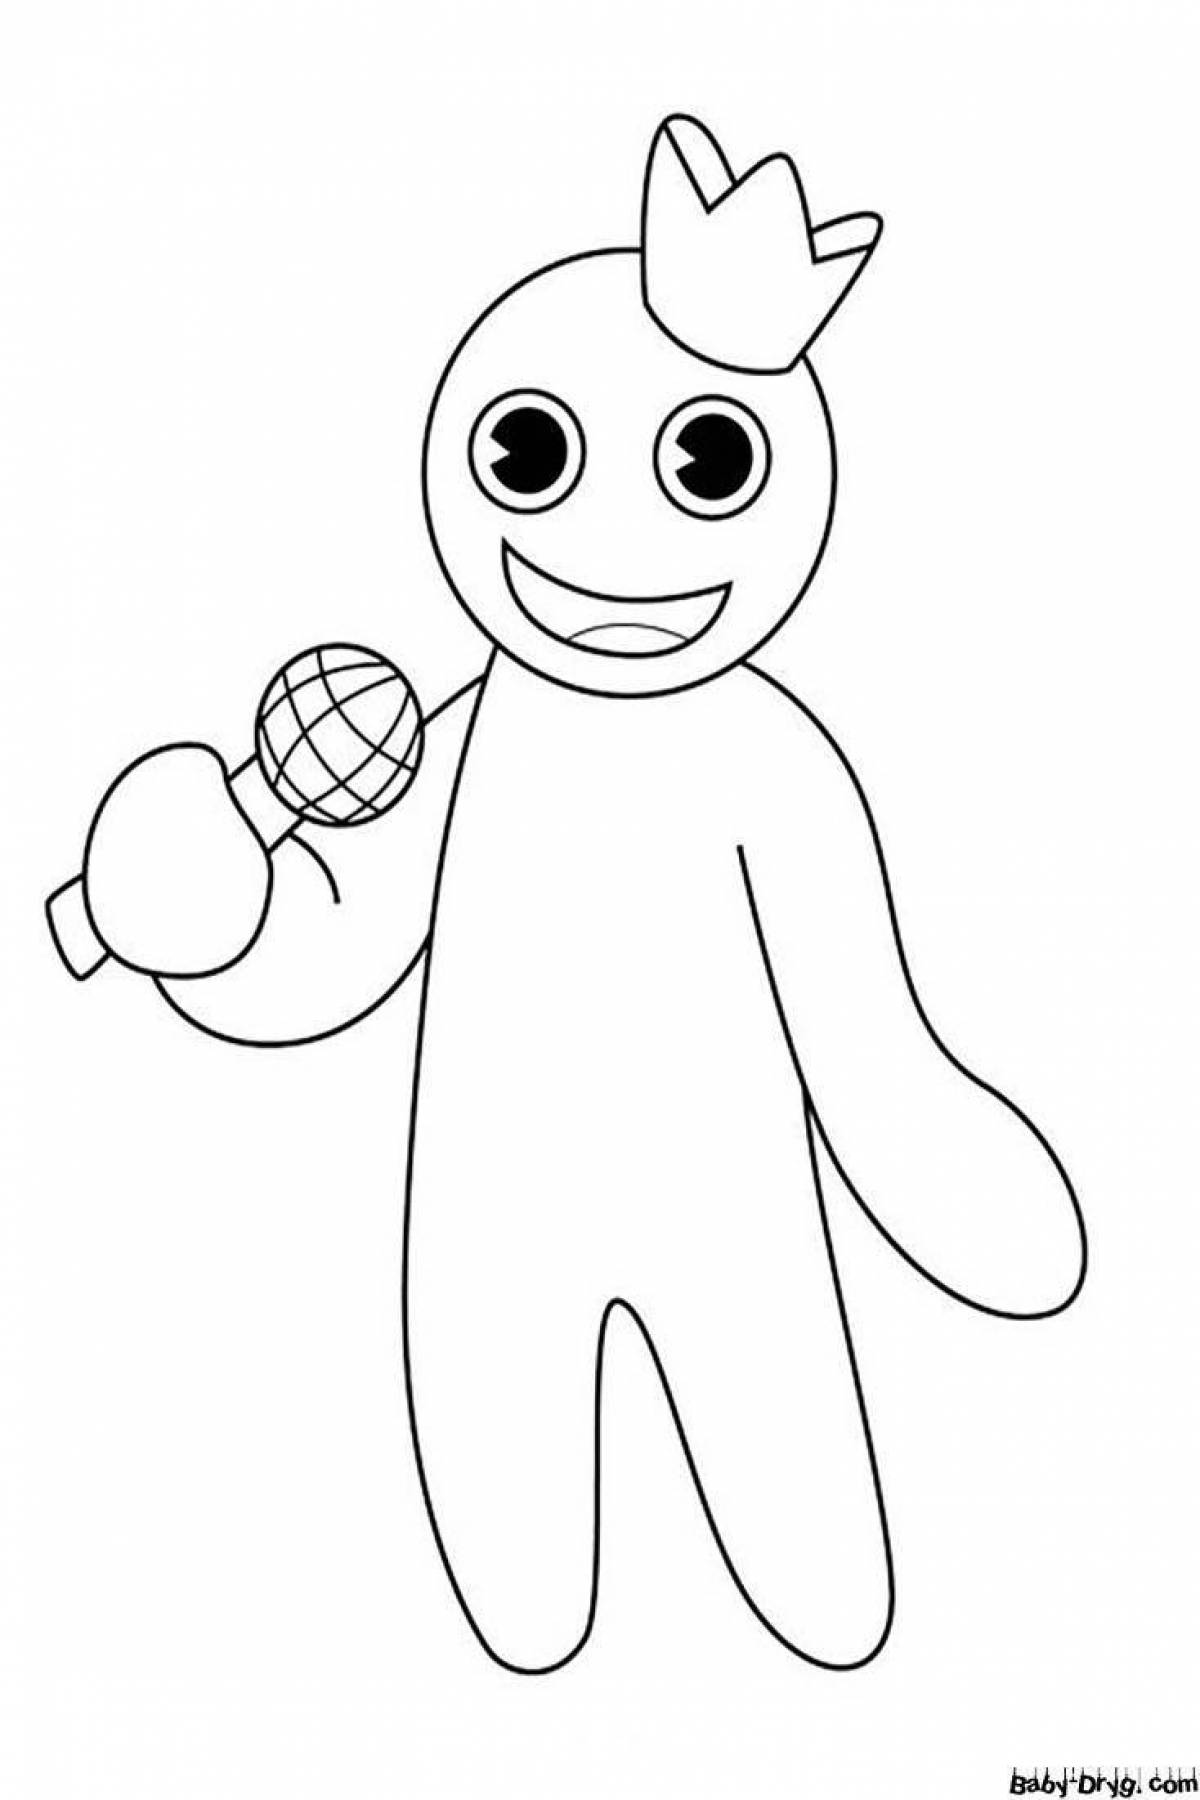 Coloring book animated rainbow friends